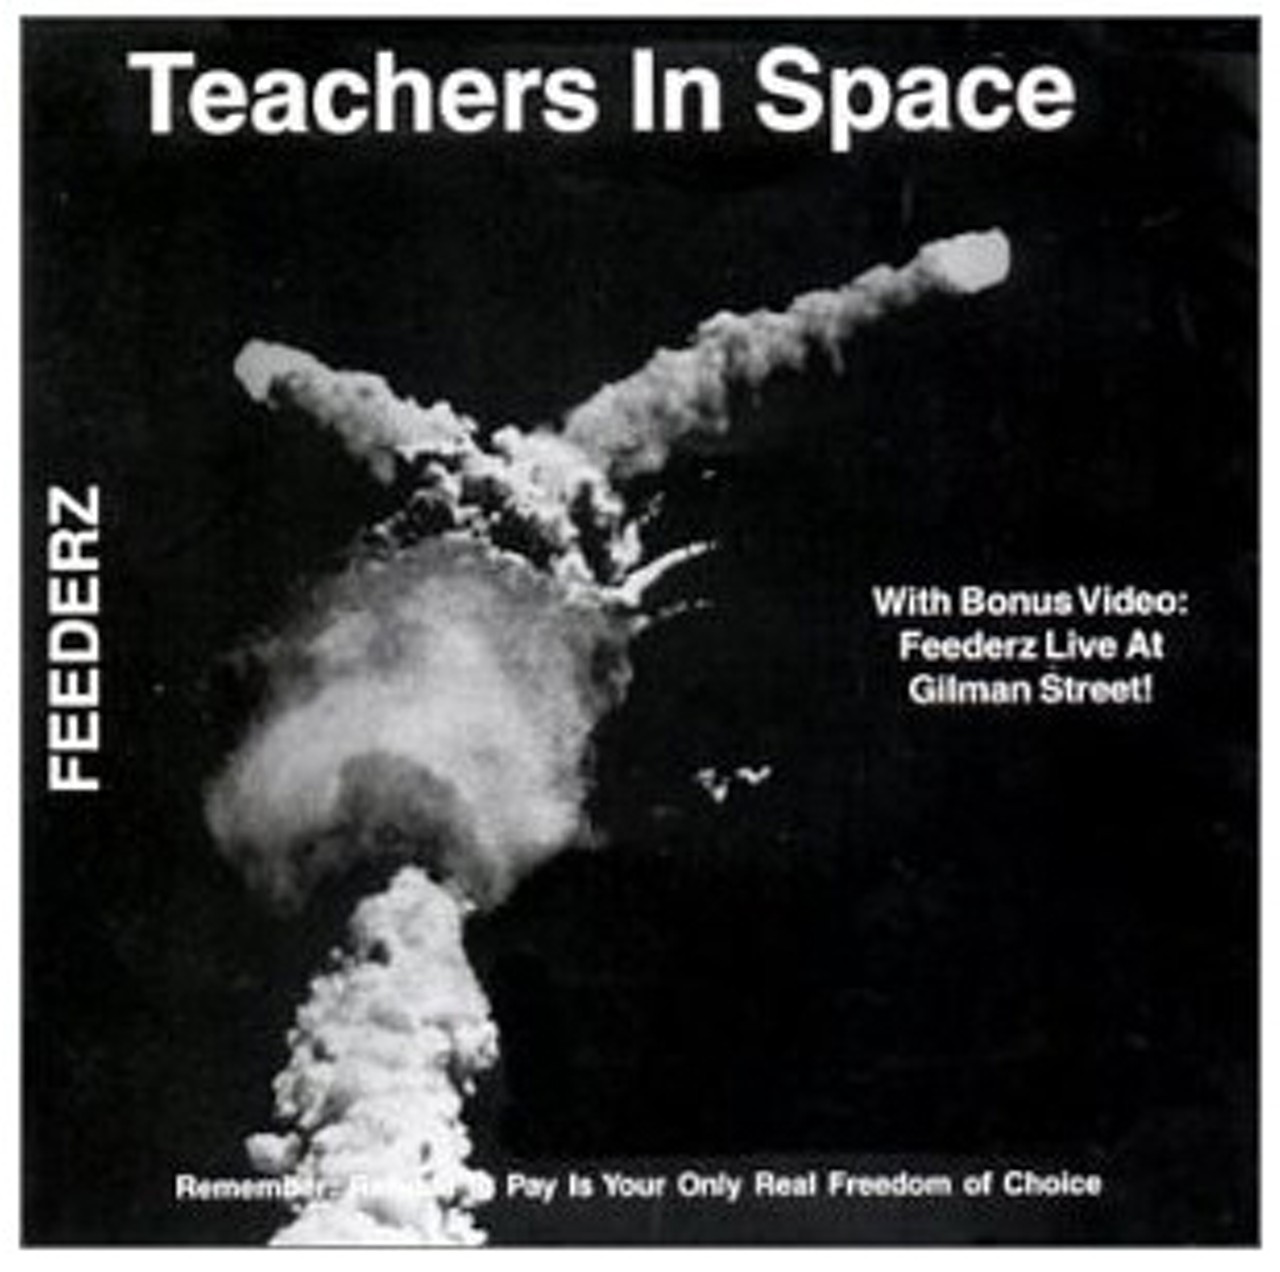 11. Speaking of space...here's another rebellious cover. Feederz' "Teachers in Space" twistedly depicts the Challenger explosion - which killed the first teacher in space, Christa McAuliffe, in 1986. Teachers in Space was a Reagan-approved NASA program that closed shop after the incident though the then-President assured the nation otherwise.